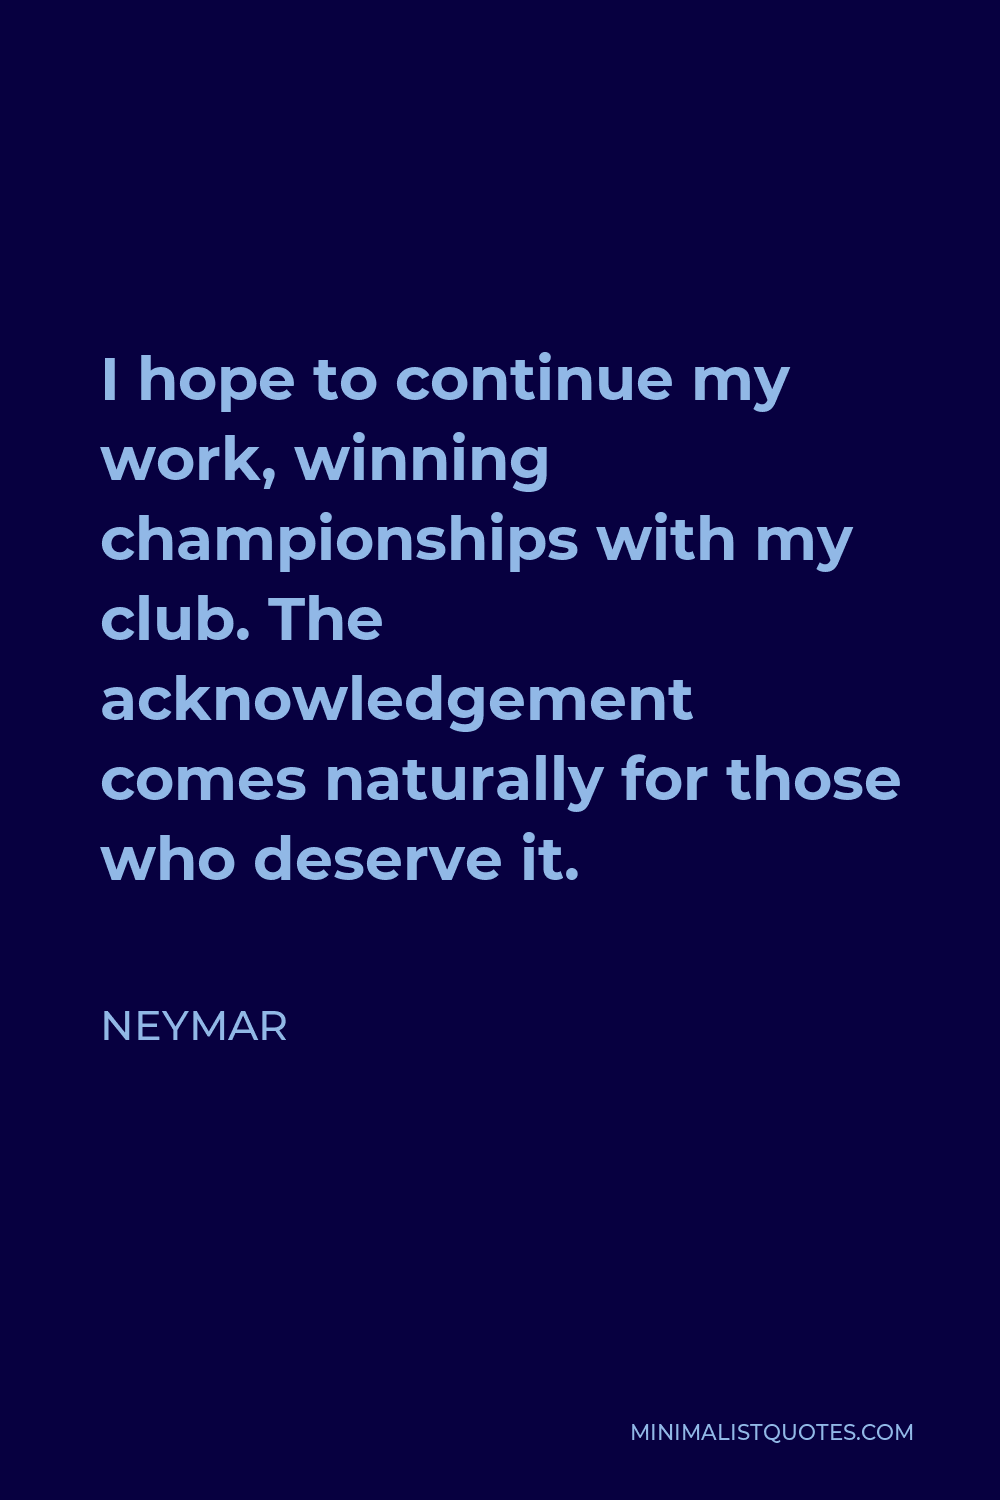 Neymar Quote - I hope to continue my work, winning championships with my club. The acknowledgement comes naturally for those who deserve it.